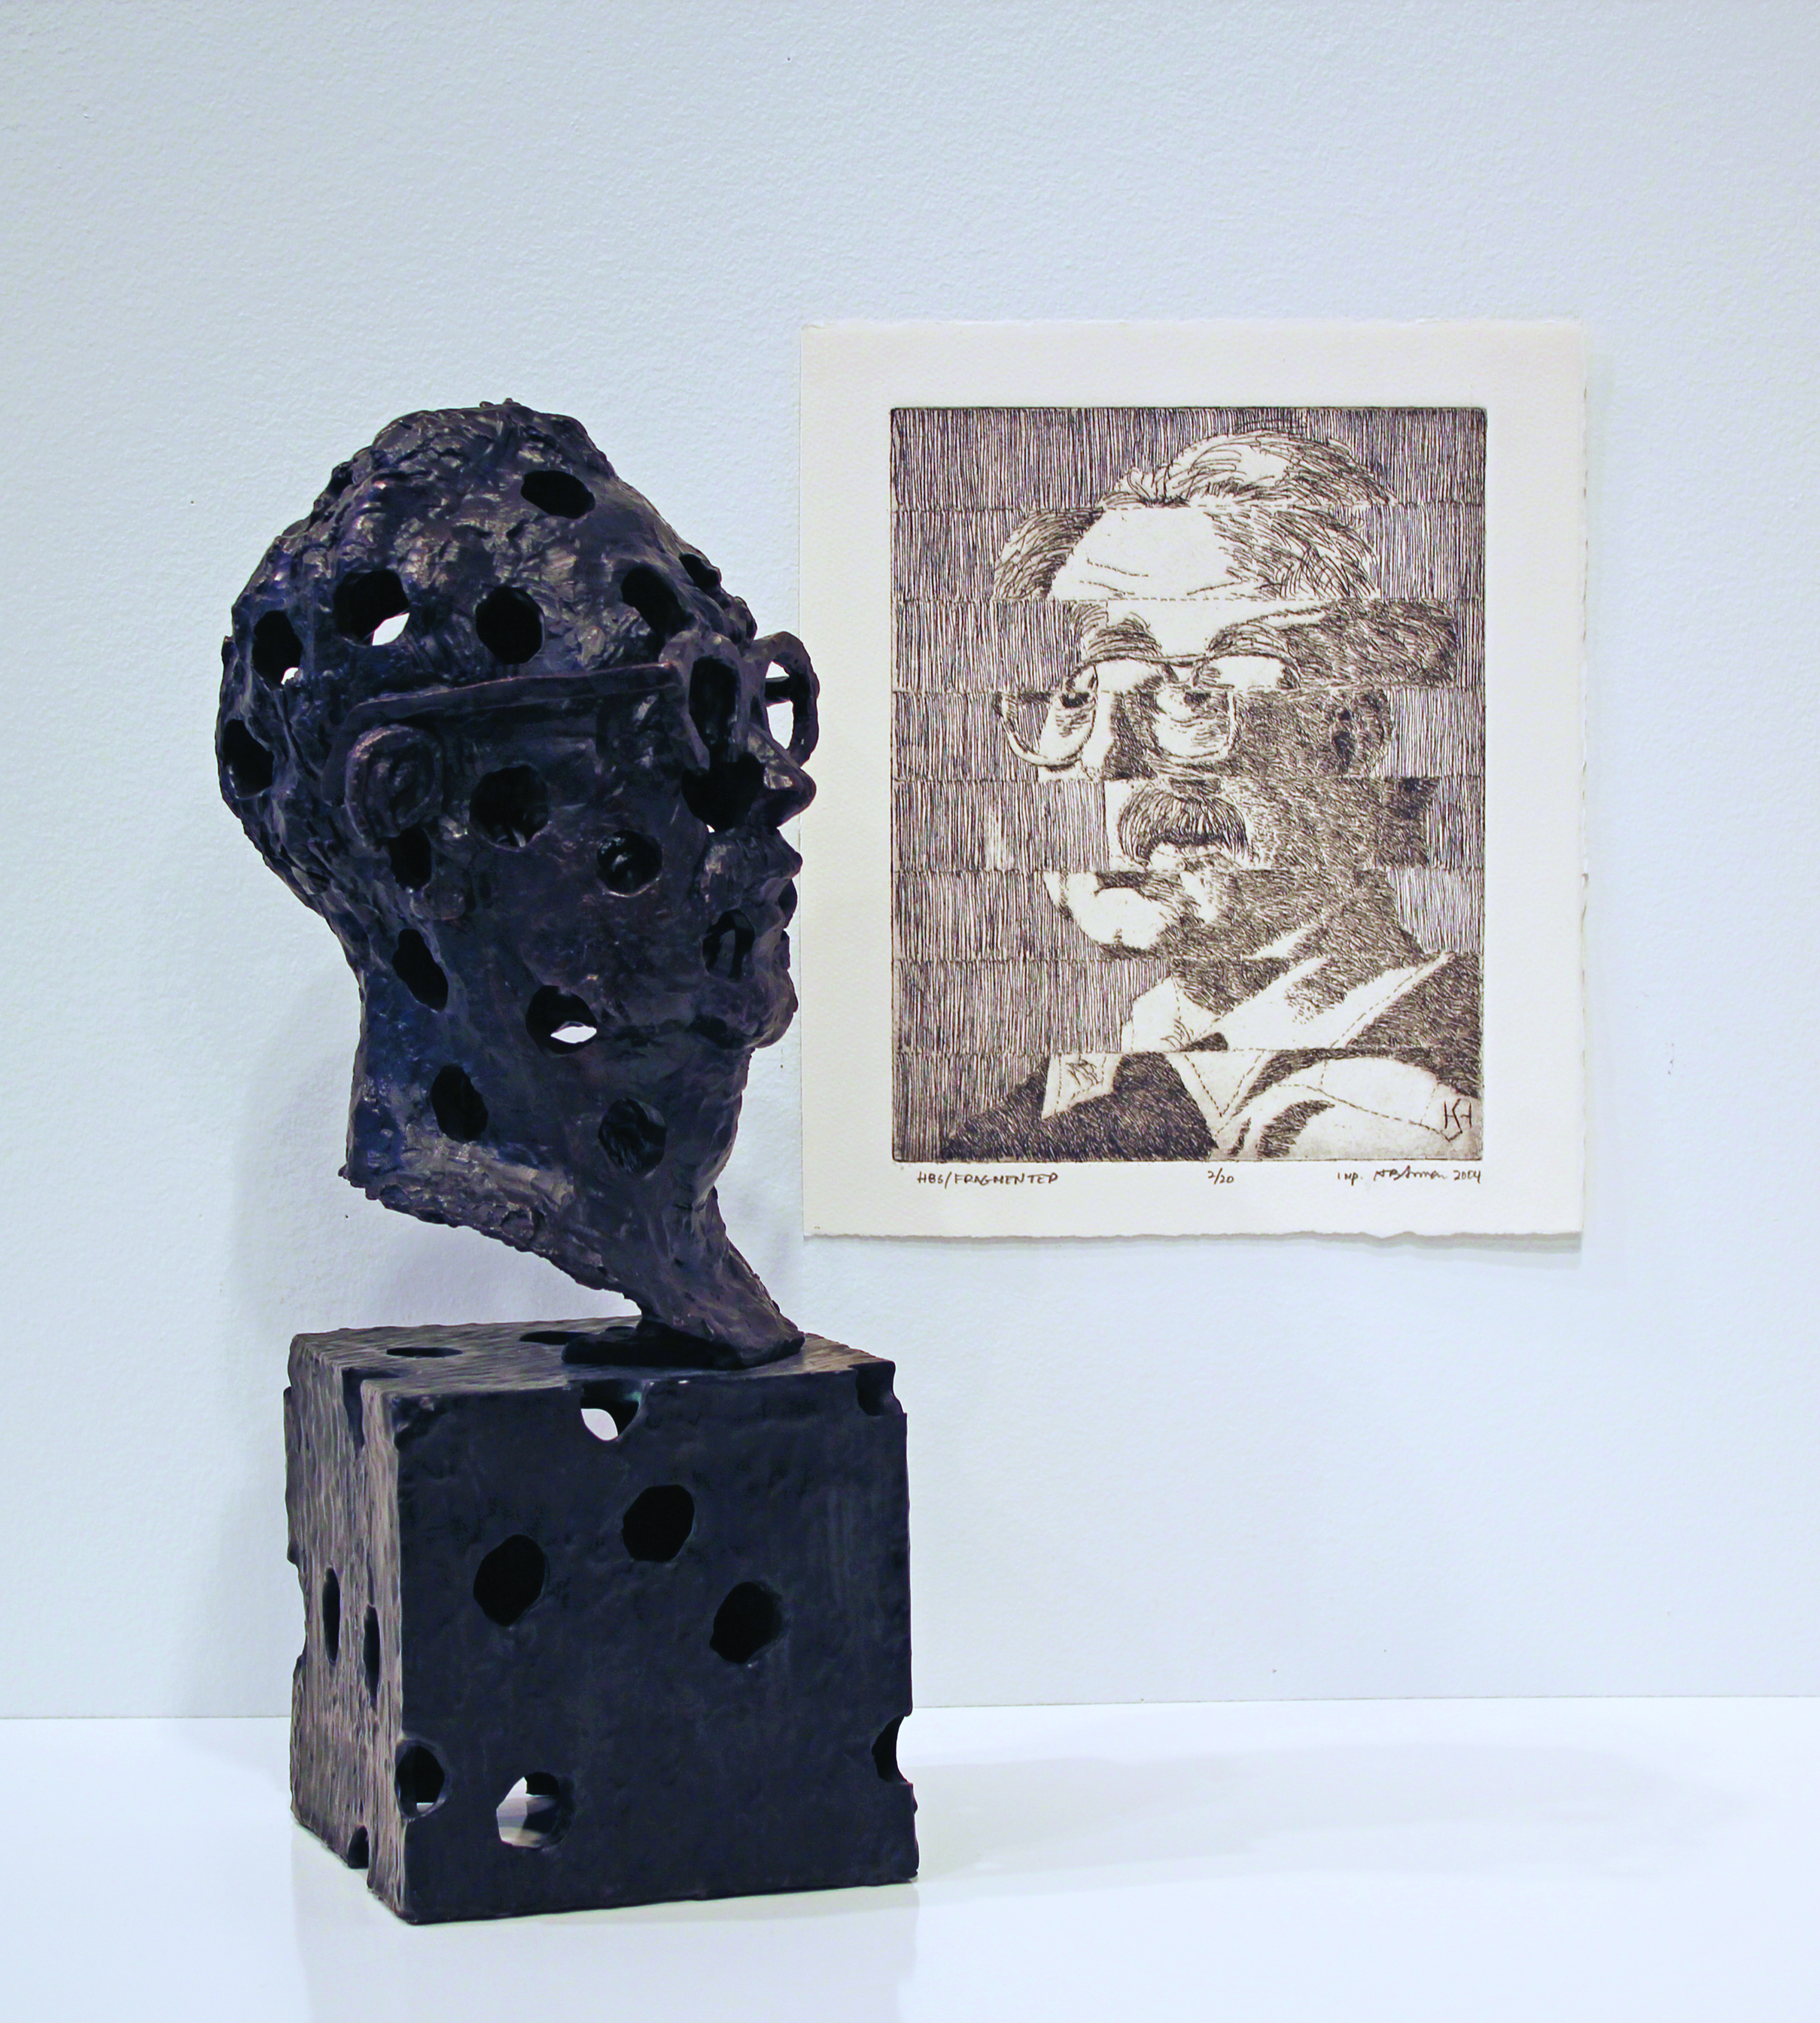 “Head III and HBS/Fragmented,” a bronze sculpture and etching by Northeast Pennsylvania artist Herbert Simon are among the pieces on display from Monday, Sept. 8, until Friday, Oct. 10, in the exhibit “Object and Image: Sculptures and Prints by Herbert Simon 1960-2014” at The University of Scranton’s Hope Horn Gallery.